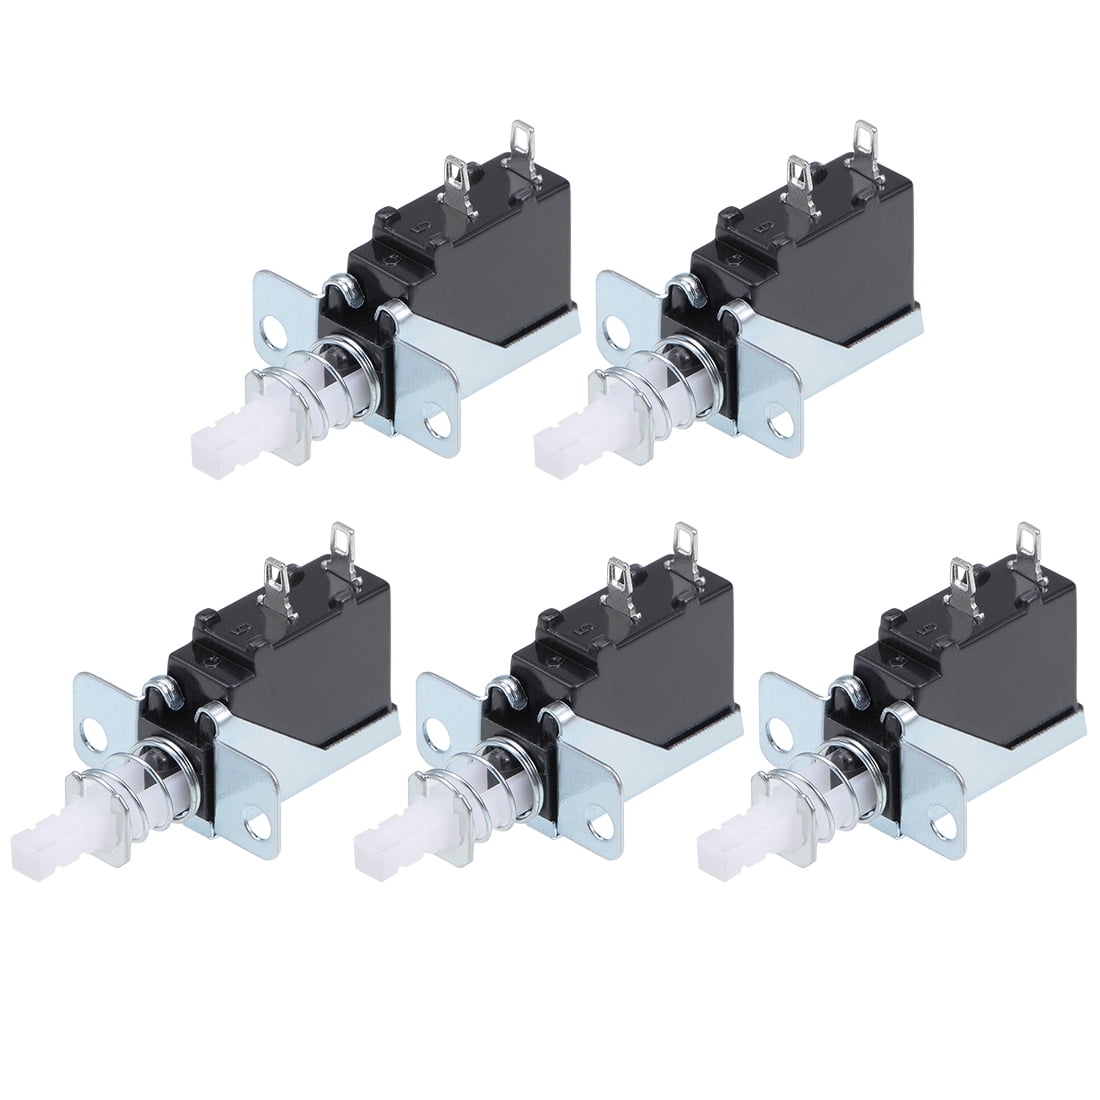 Details about   Push Button Switch 8A 250V SPST 2 Pin 1 Position Self-Locking Black 5pcs